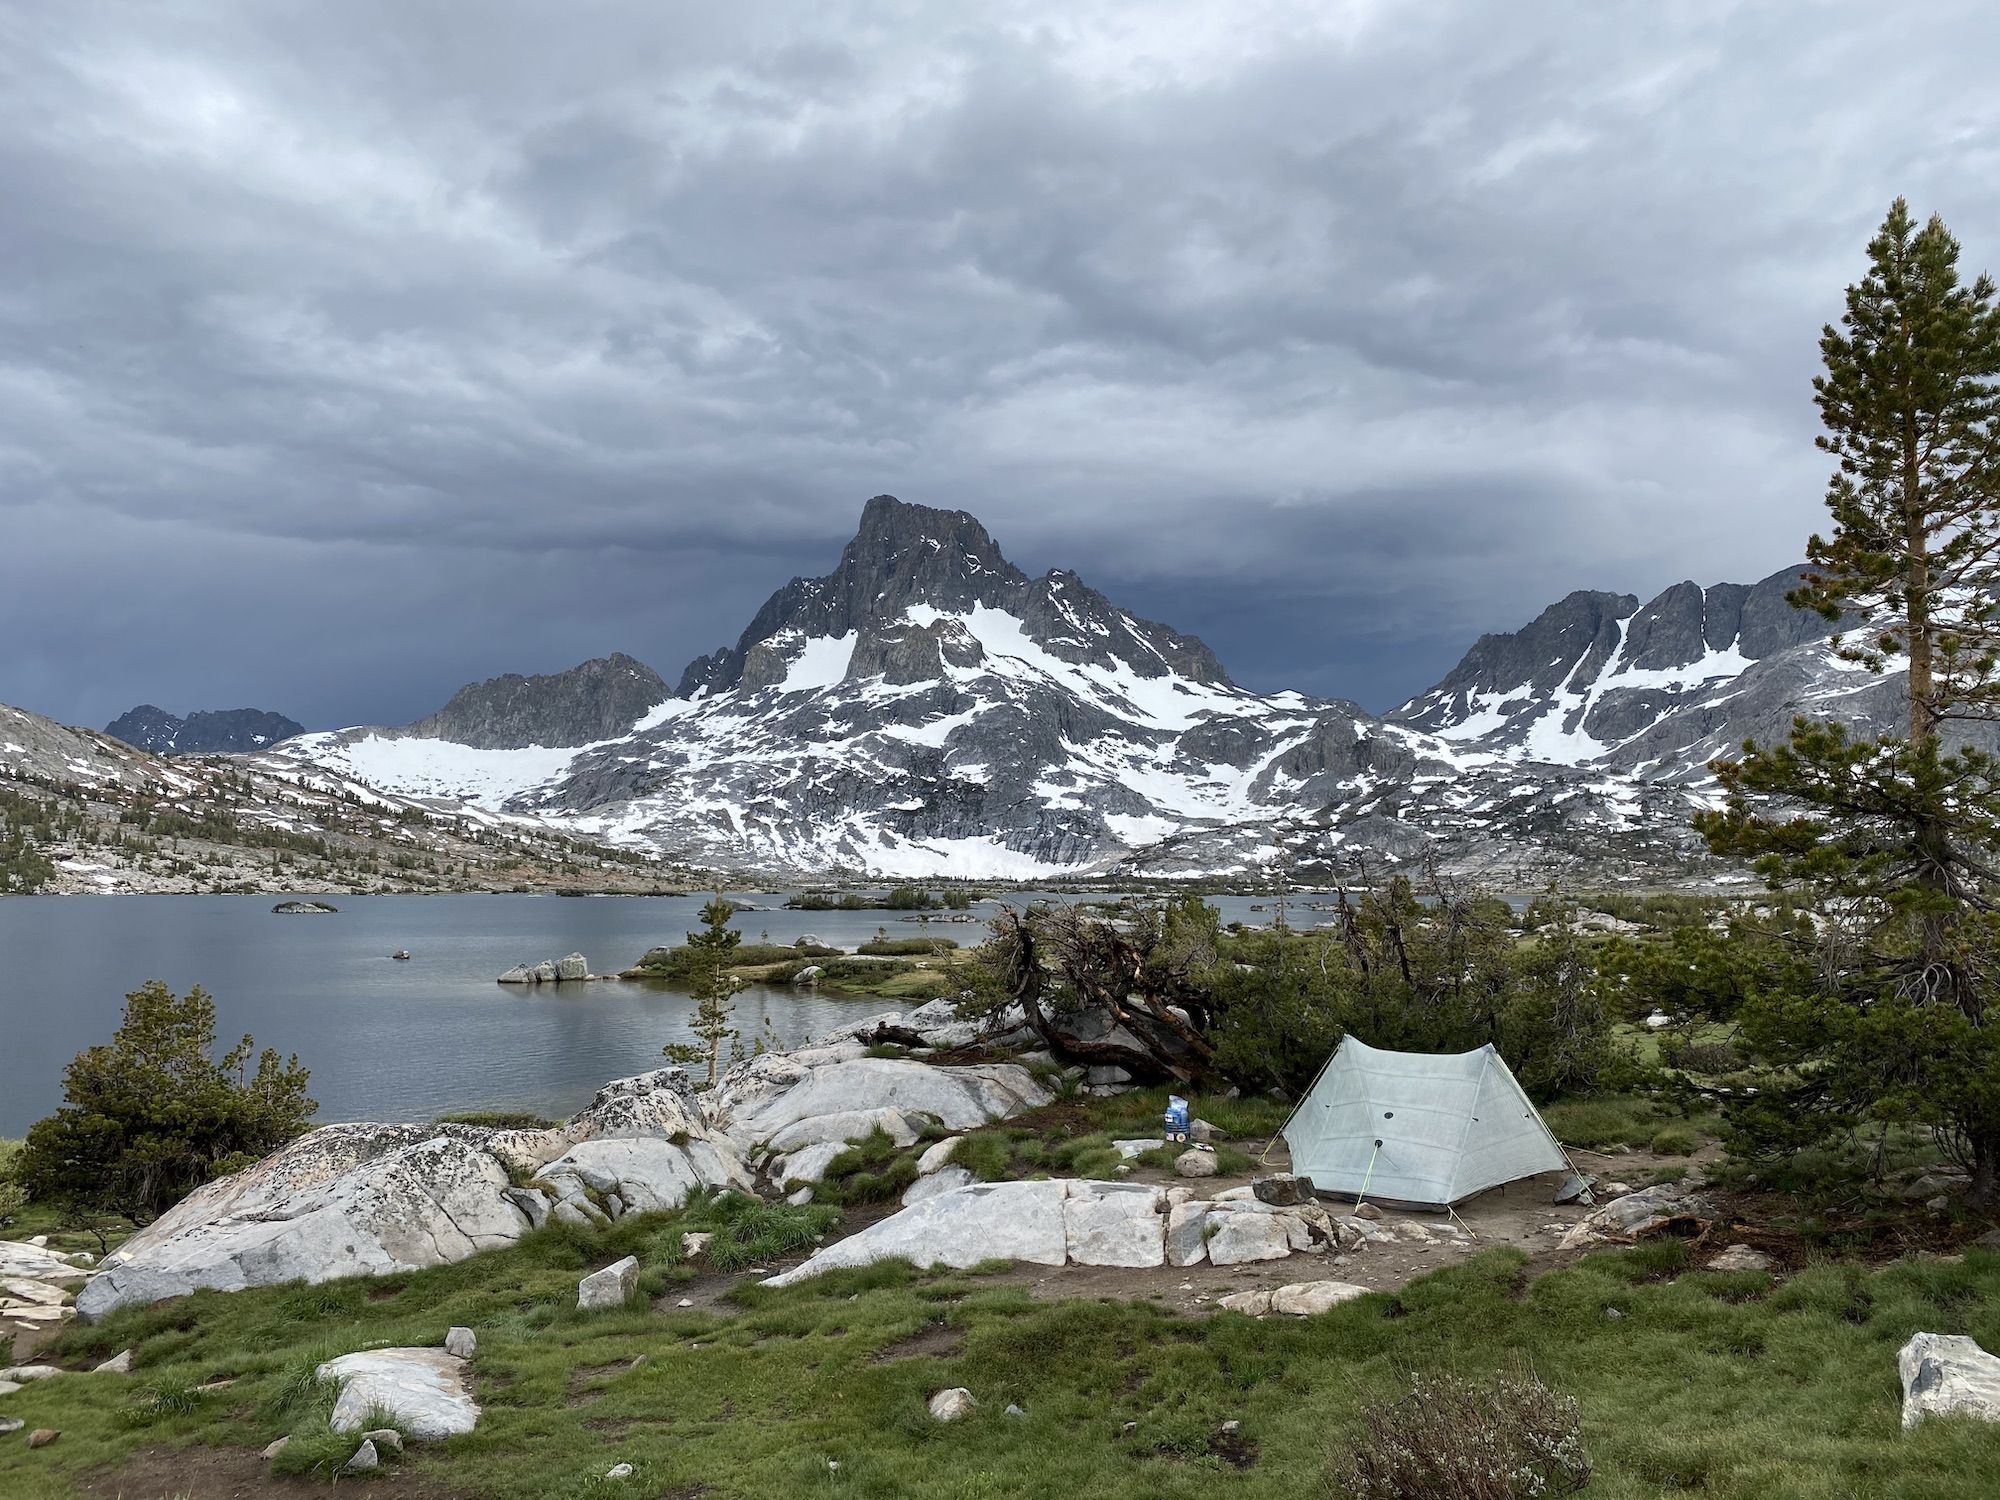 A tent behind bushes. Thousand Island Lake is one of the most popular backpacking destinations in Ansel Adams